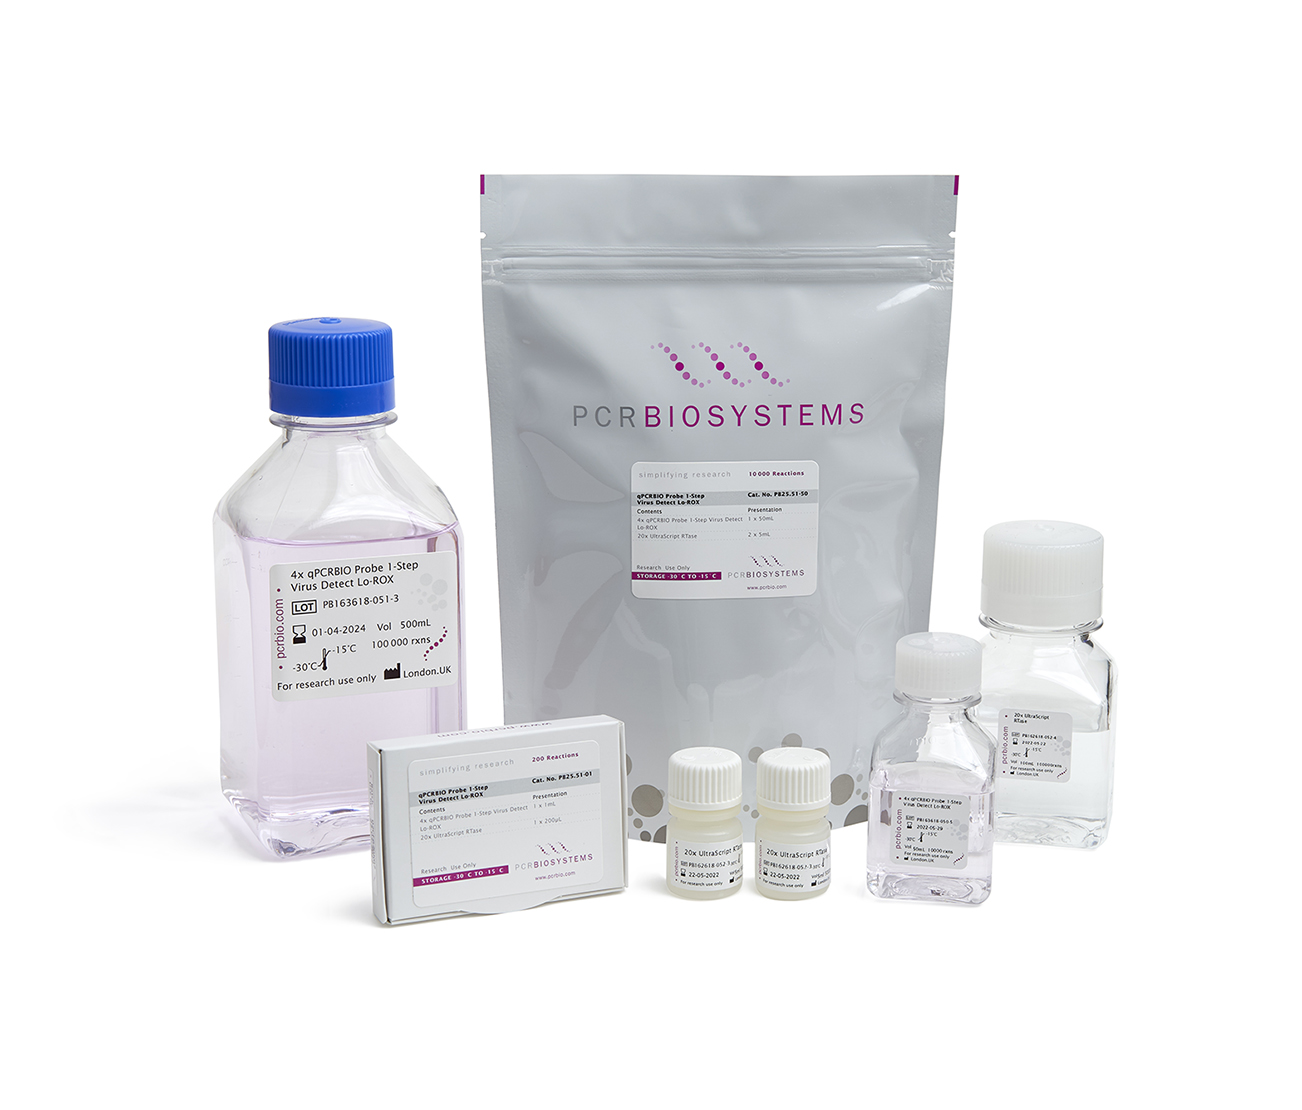 Product photo showing the different standard and bulk pack sizes of qPCRBIO Probe 1-Step Virus Detect